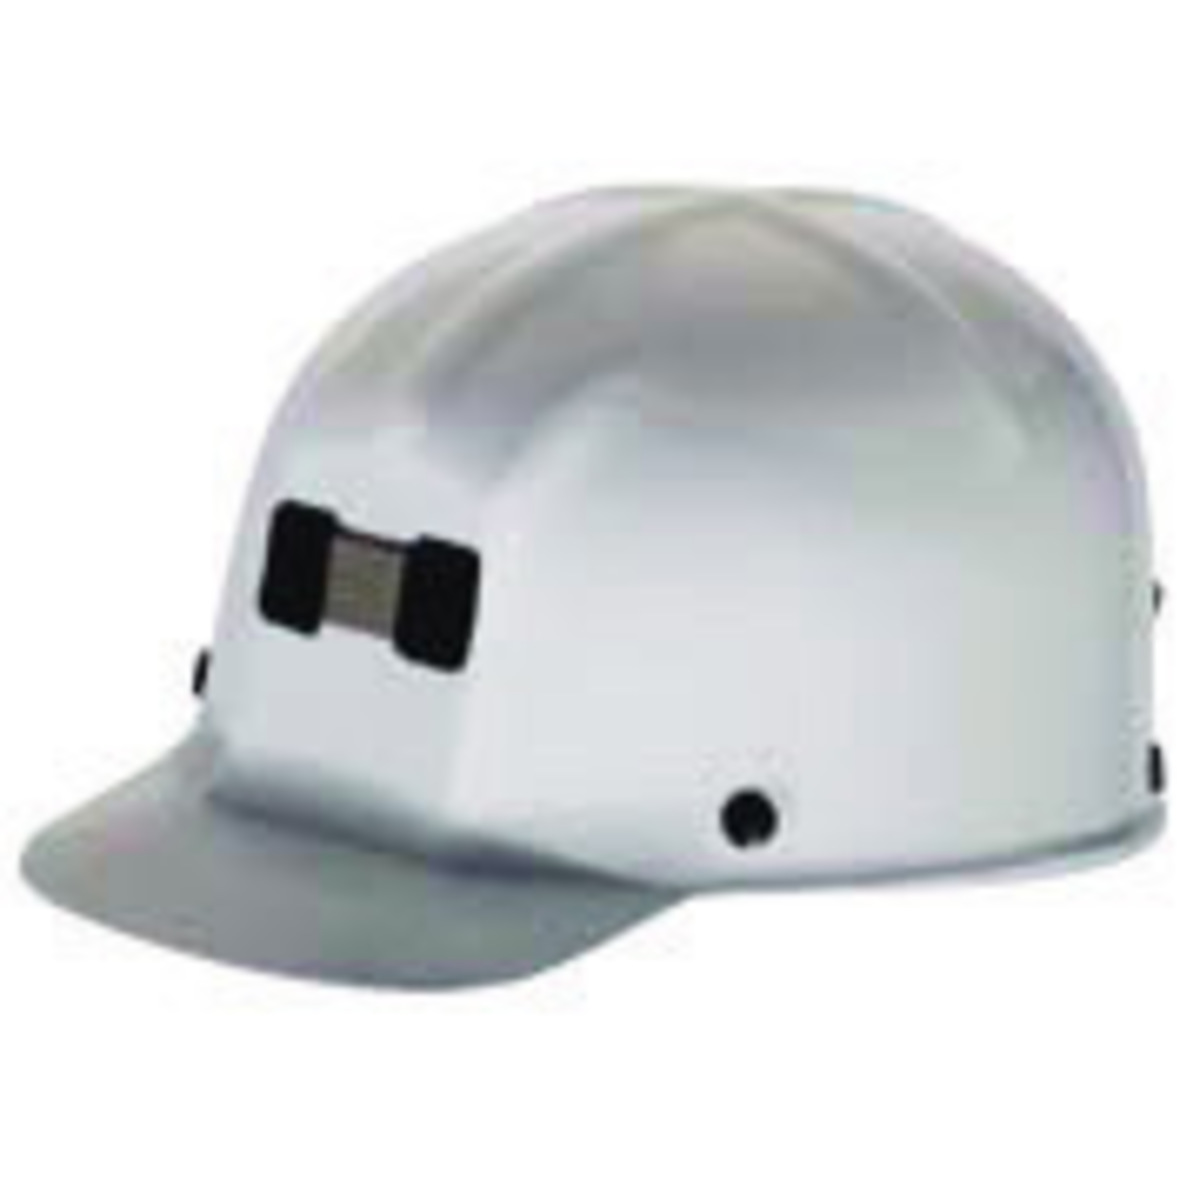 MSA White Polycarbonate Cap Style Hard Hat With Pinlock/4 Point Pinlock Suspension